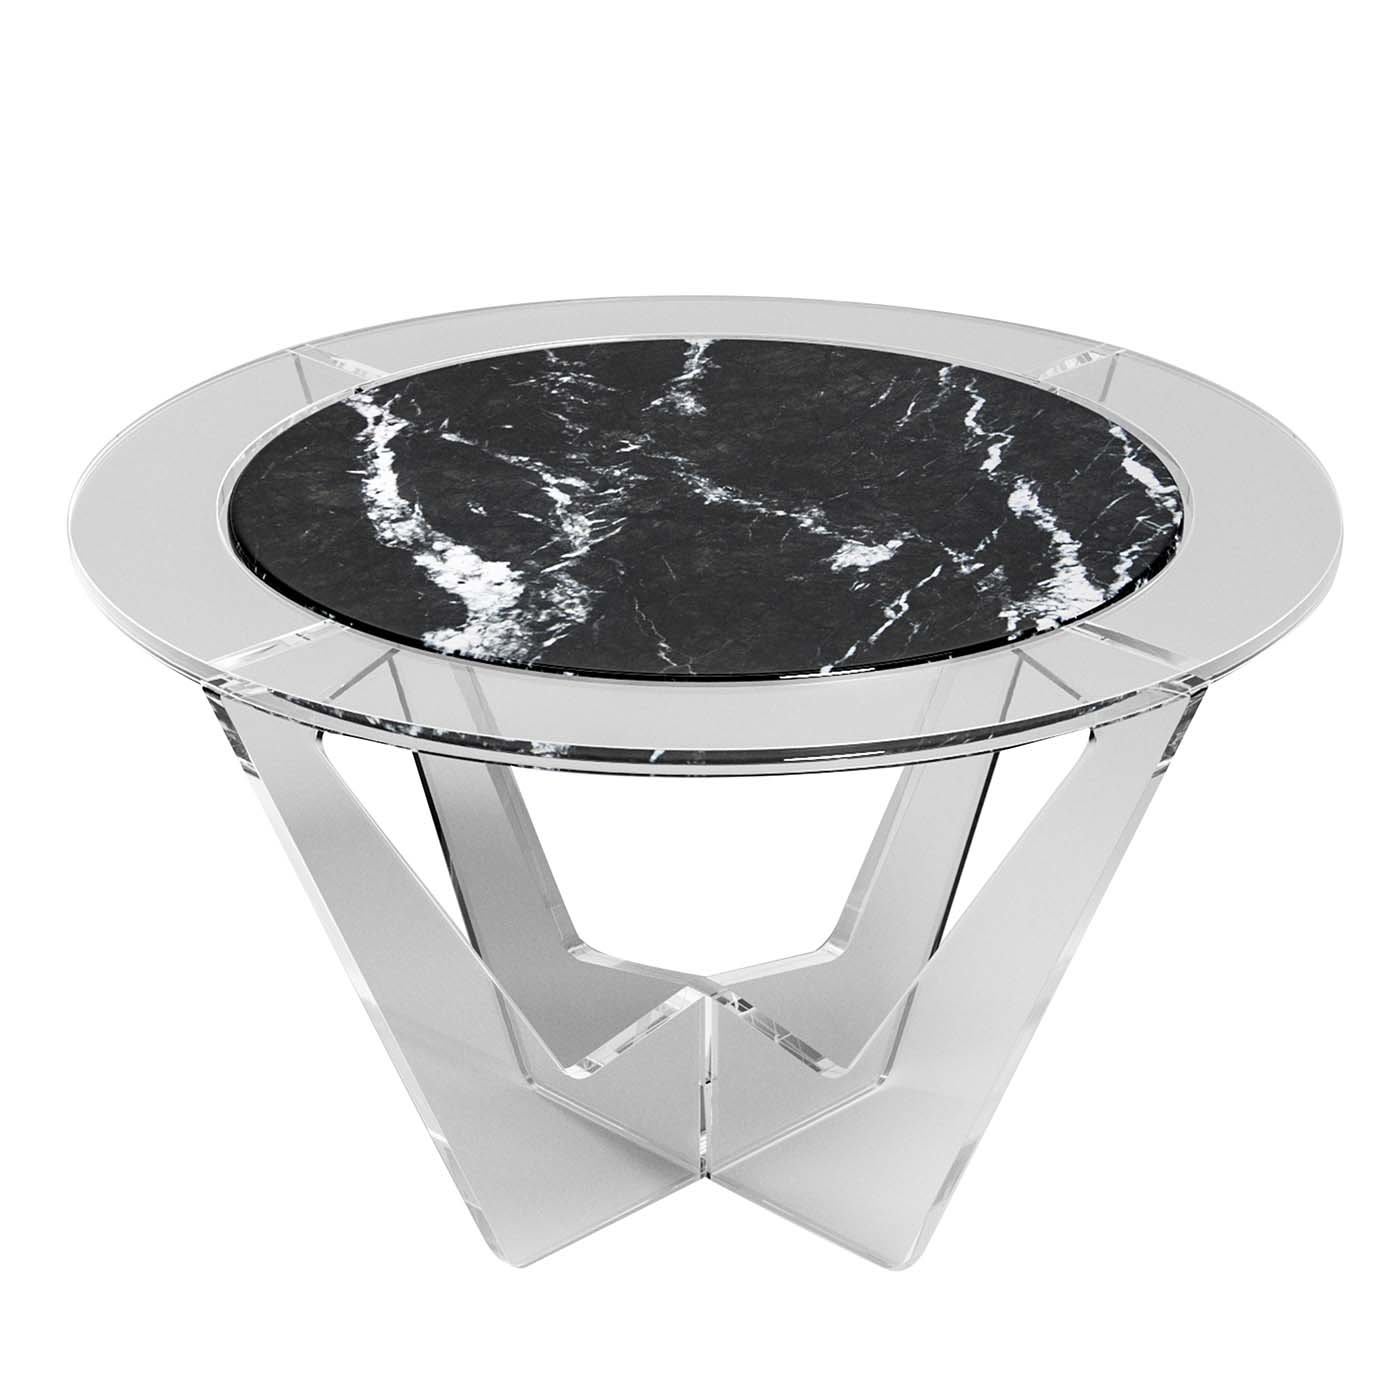 Hac Round Coffee Table with Carnico Marble Top - Madea Milano